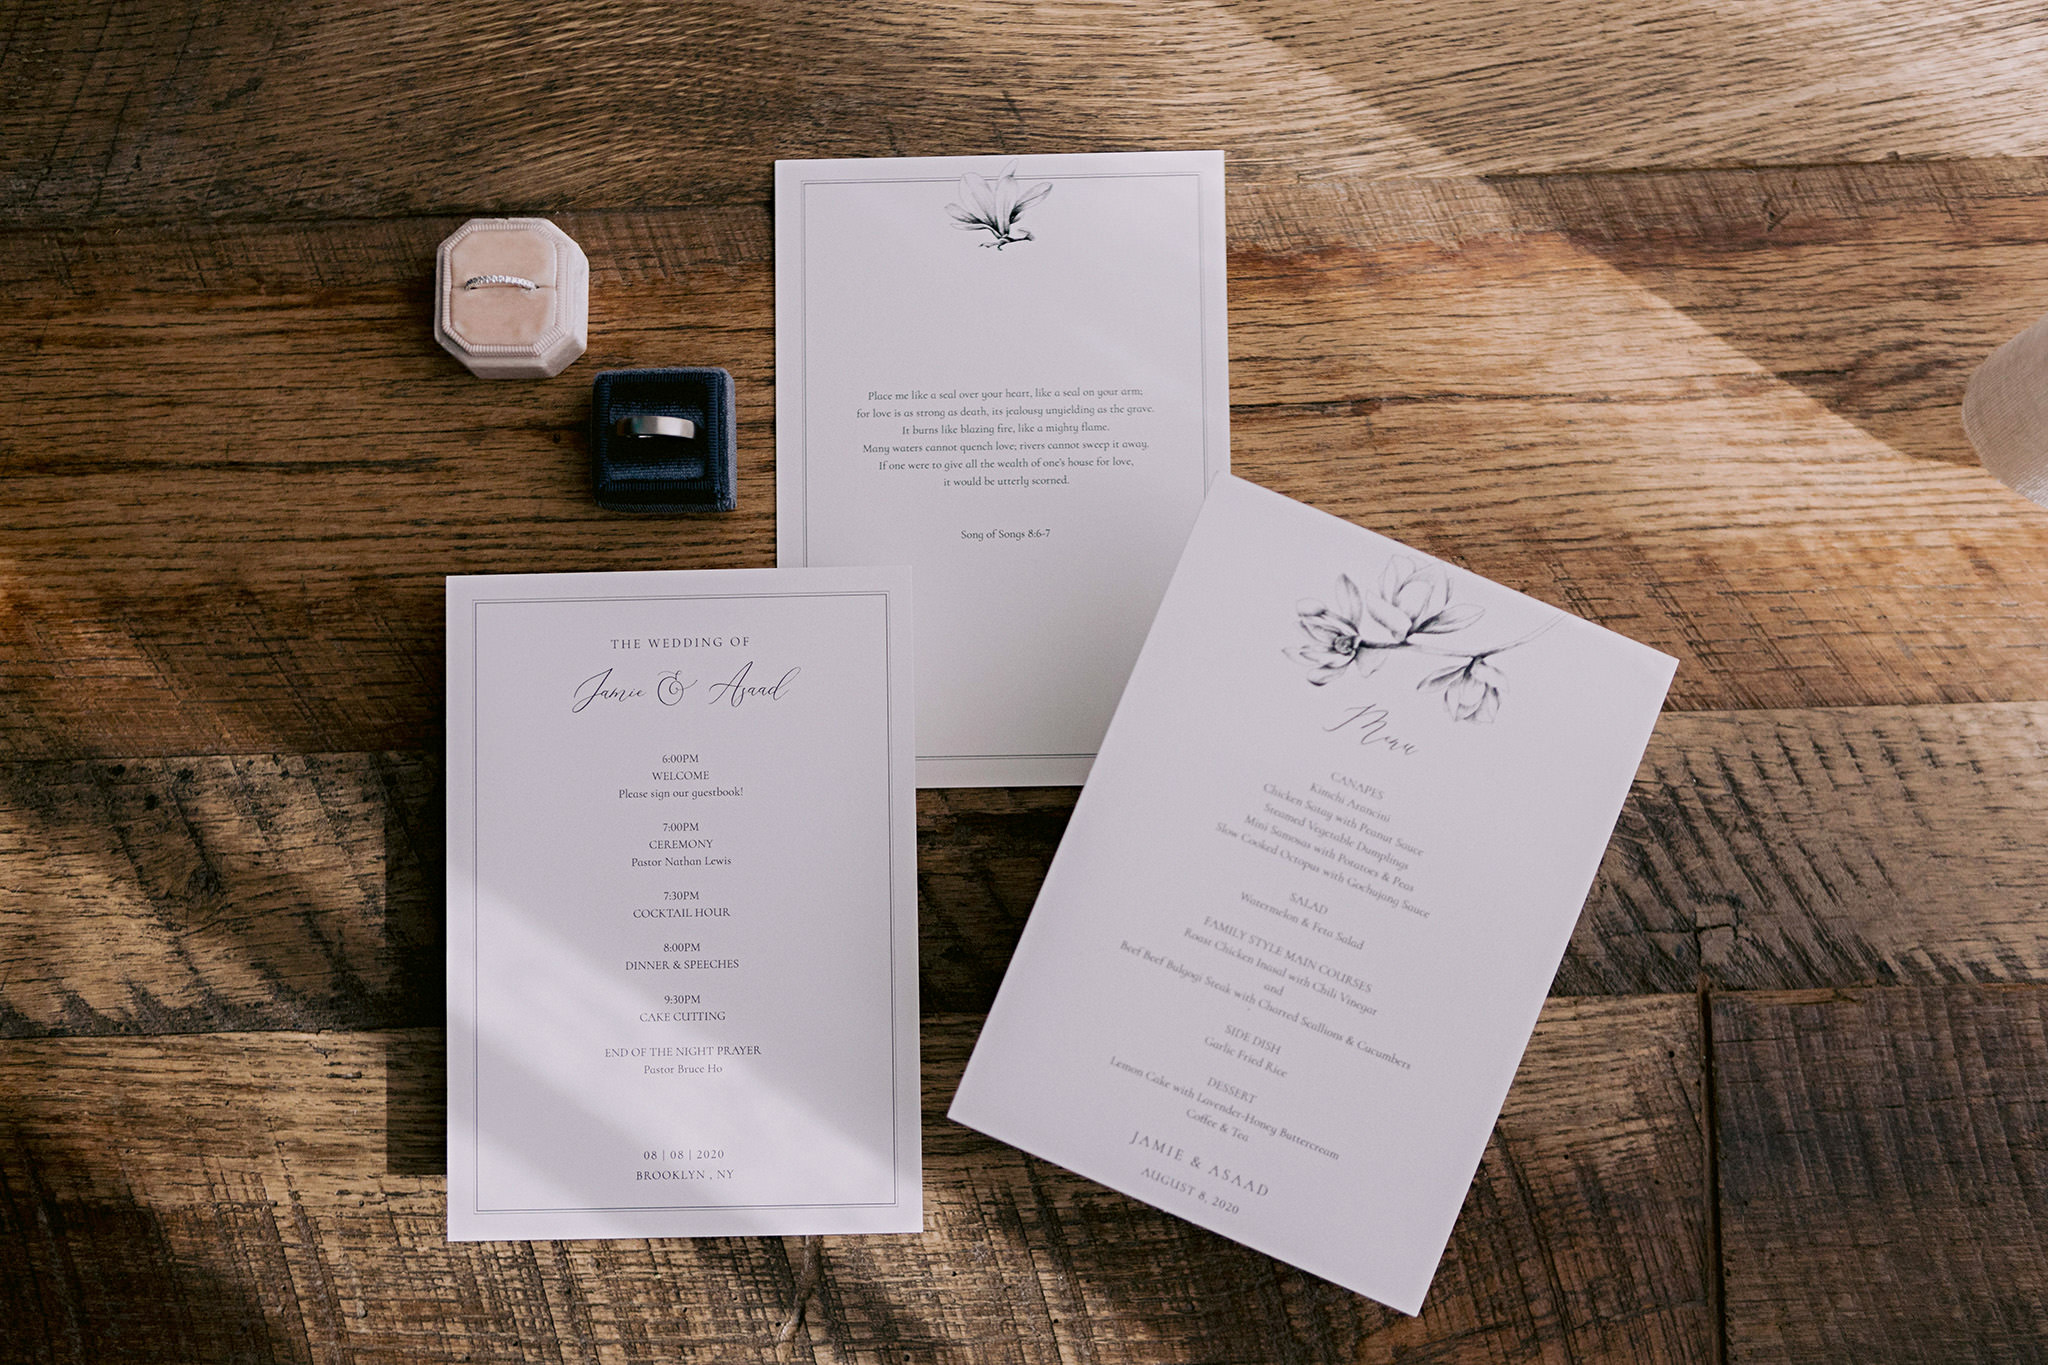 Wedding invitations and wedding bands placed on a wooden table top.